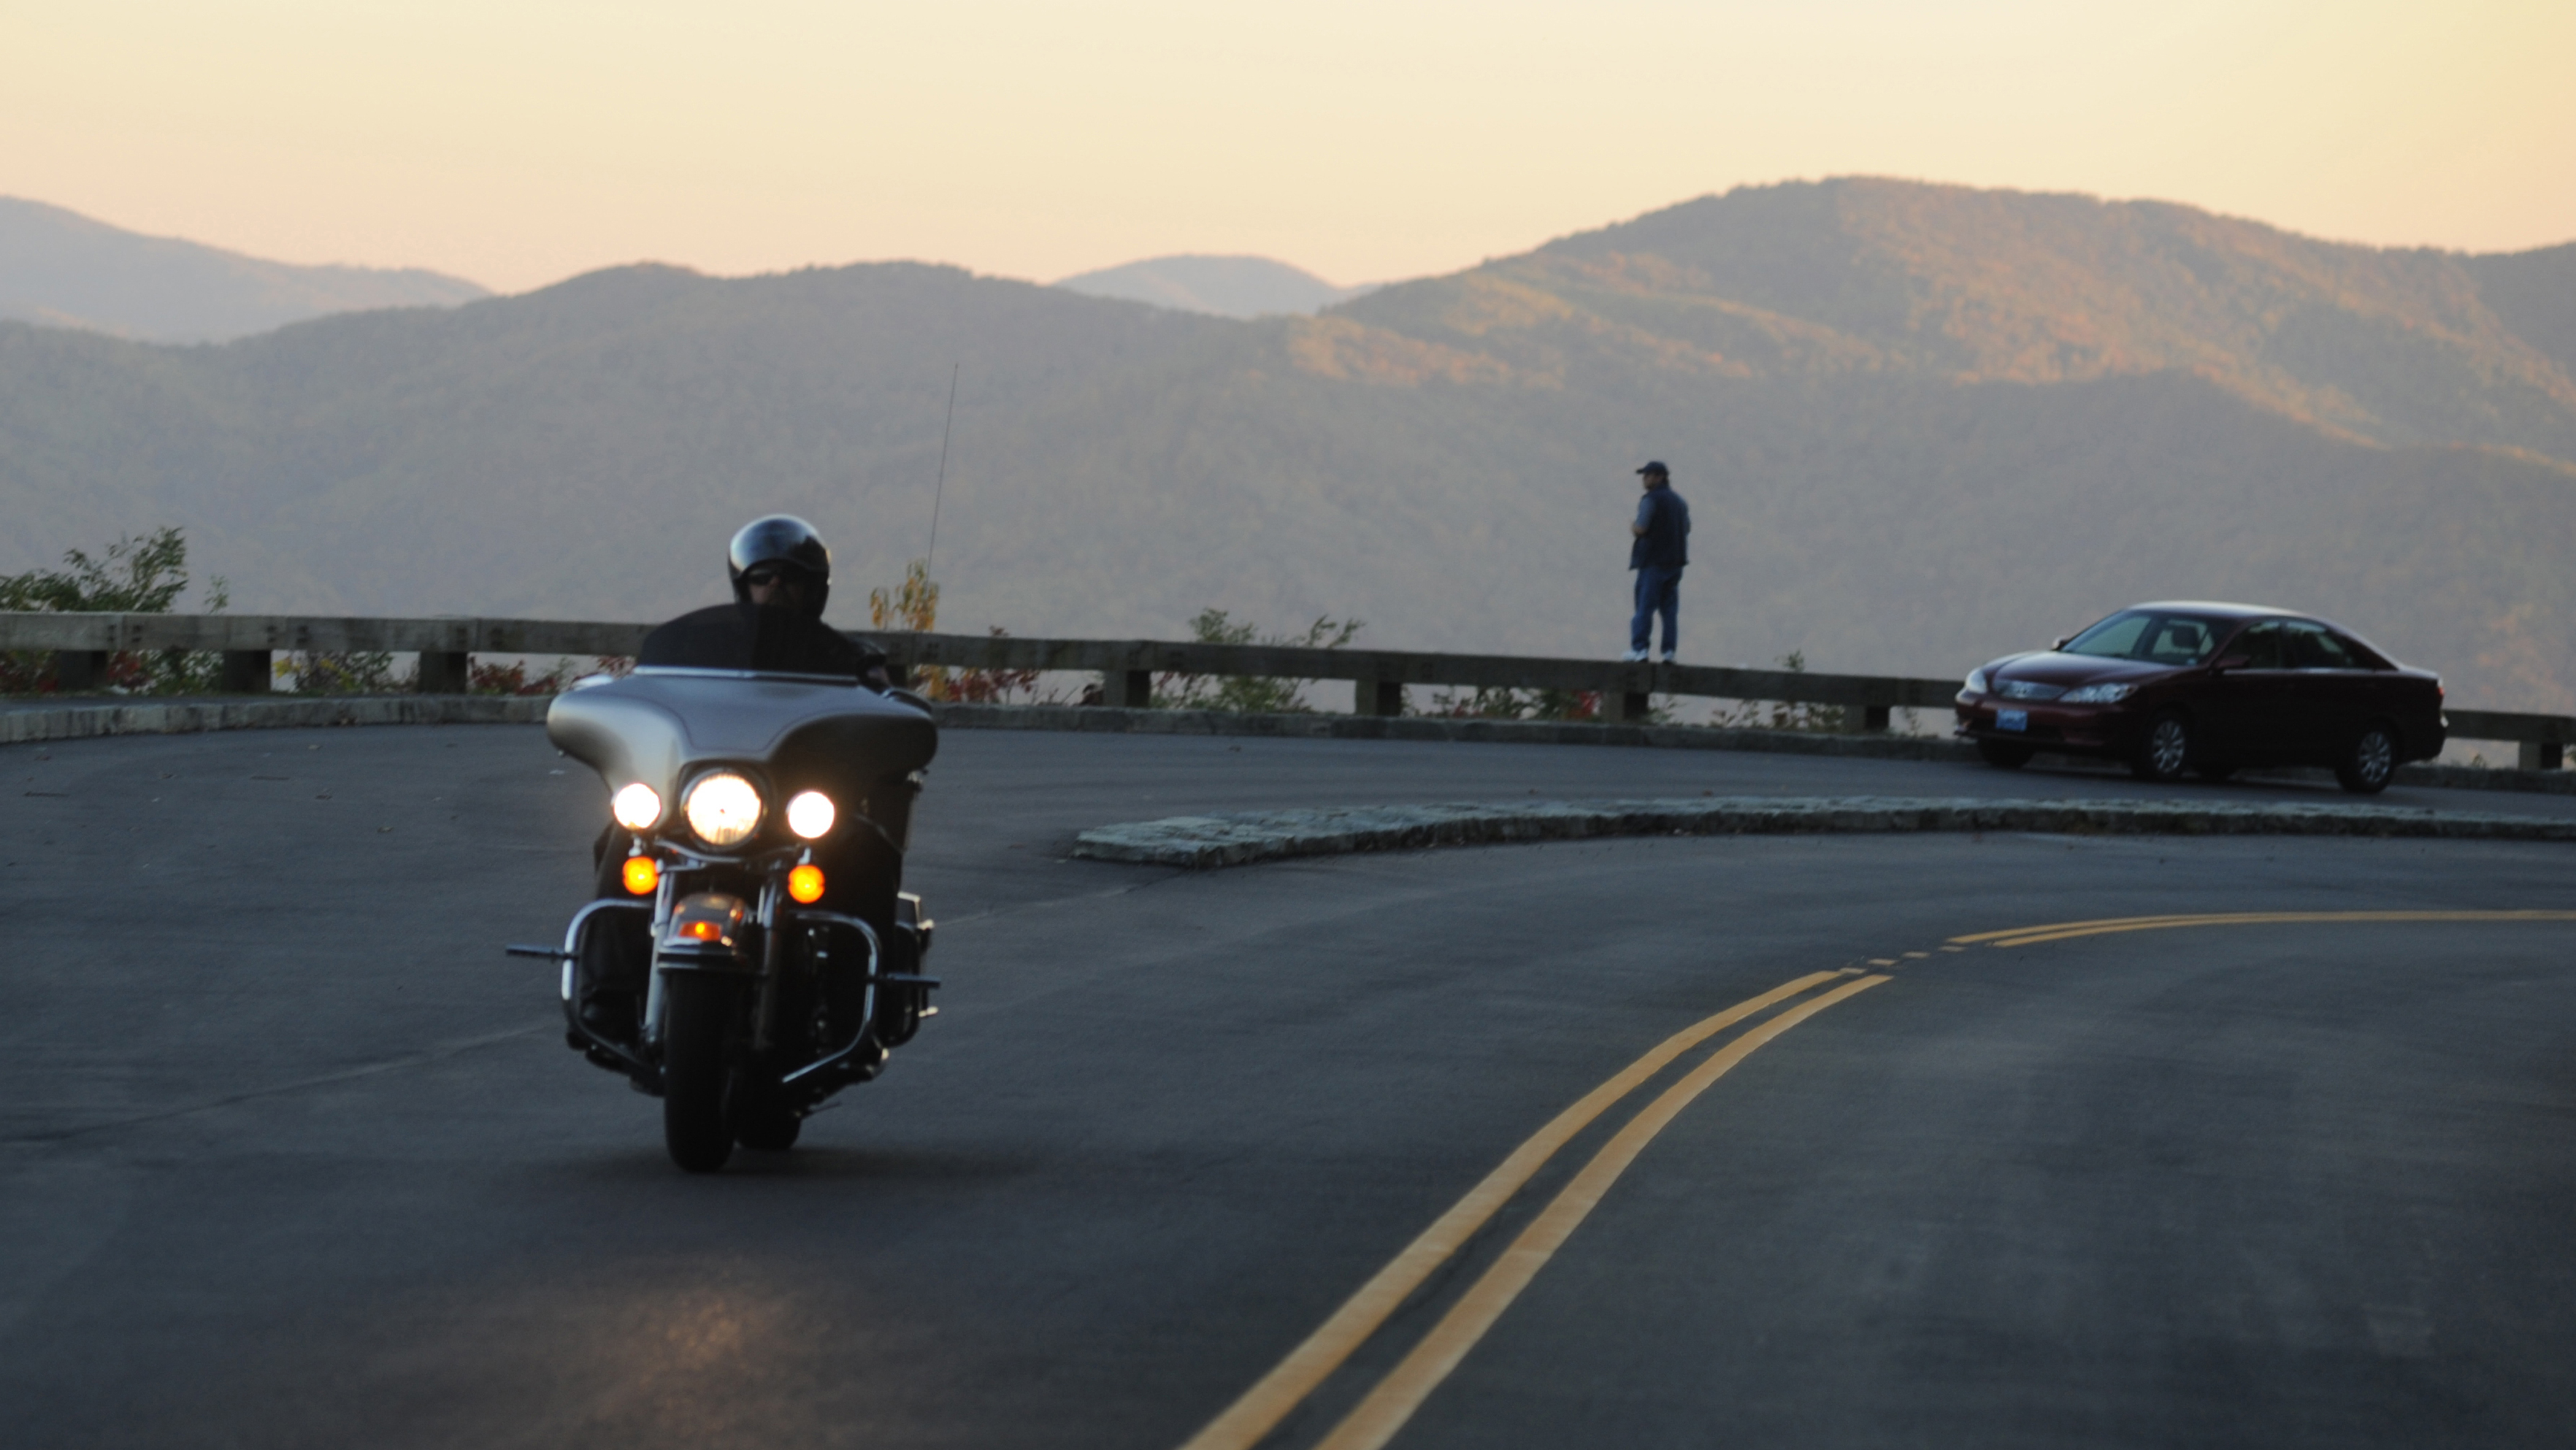 Fall Motorcycle Ride along the Blue Ridge Parkway